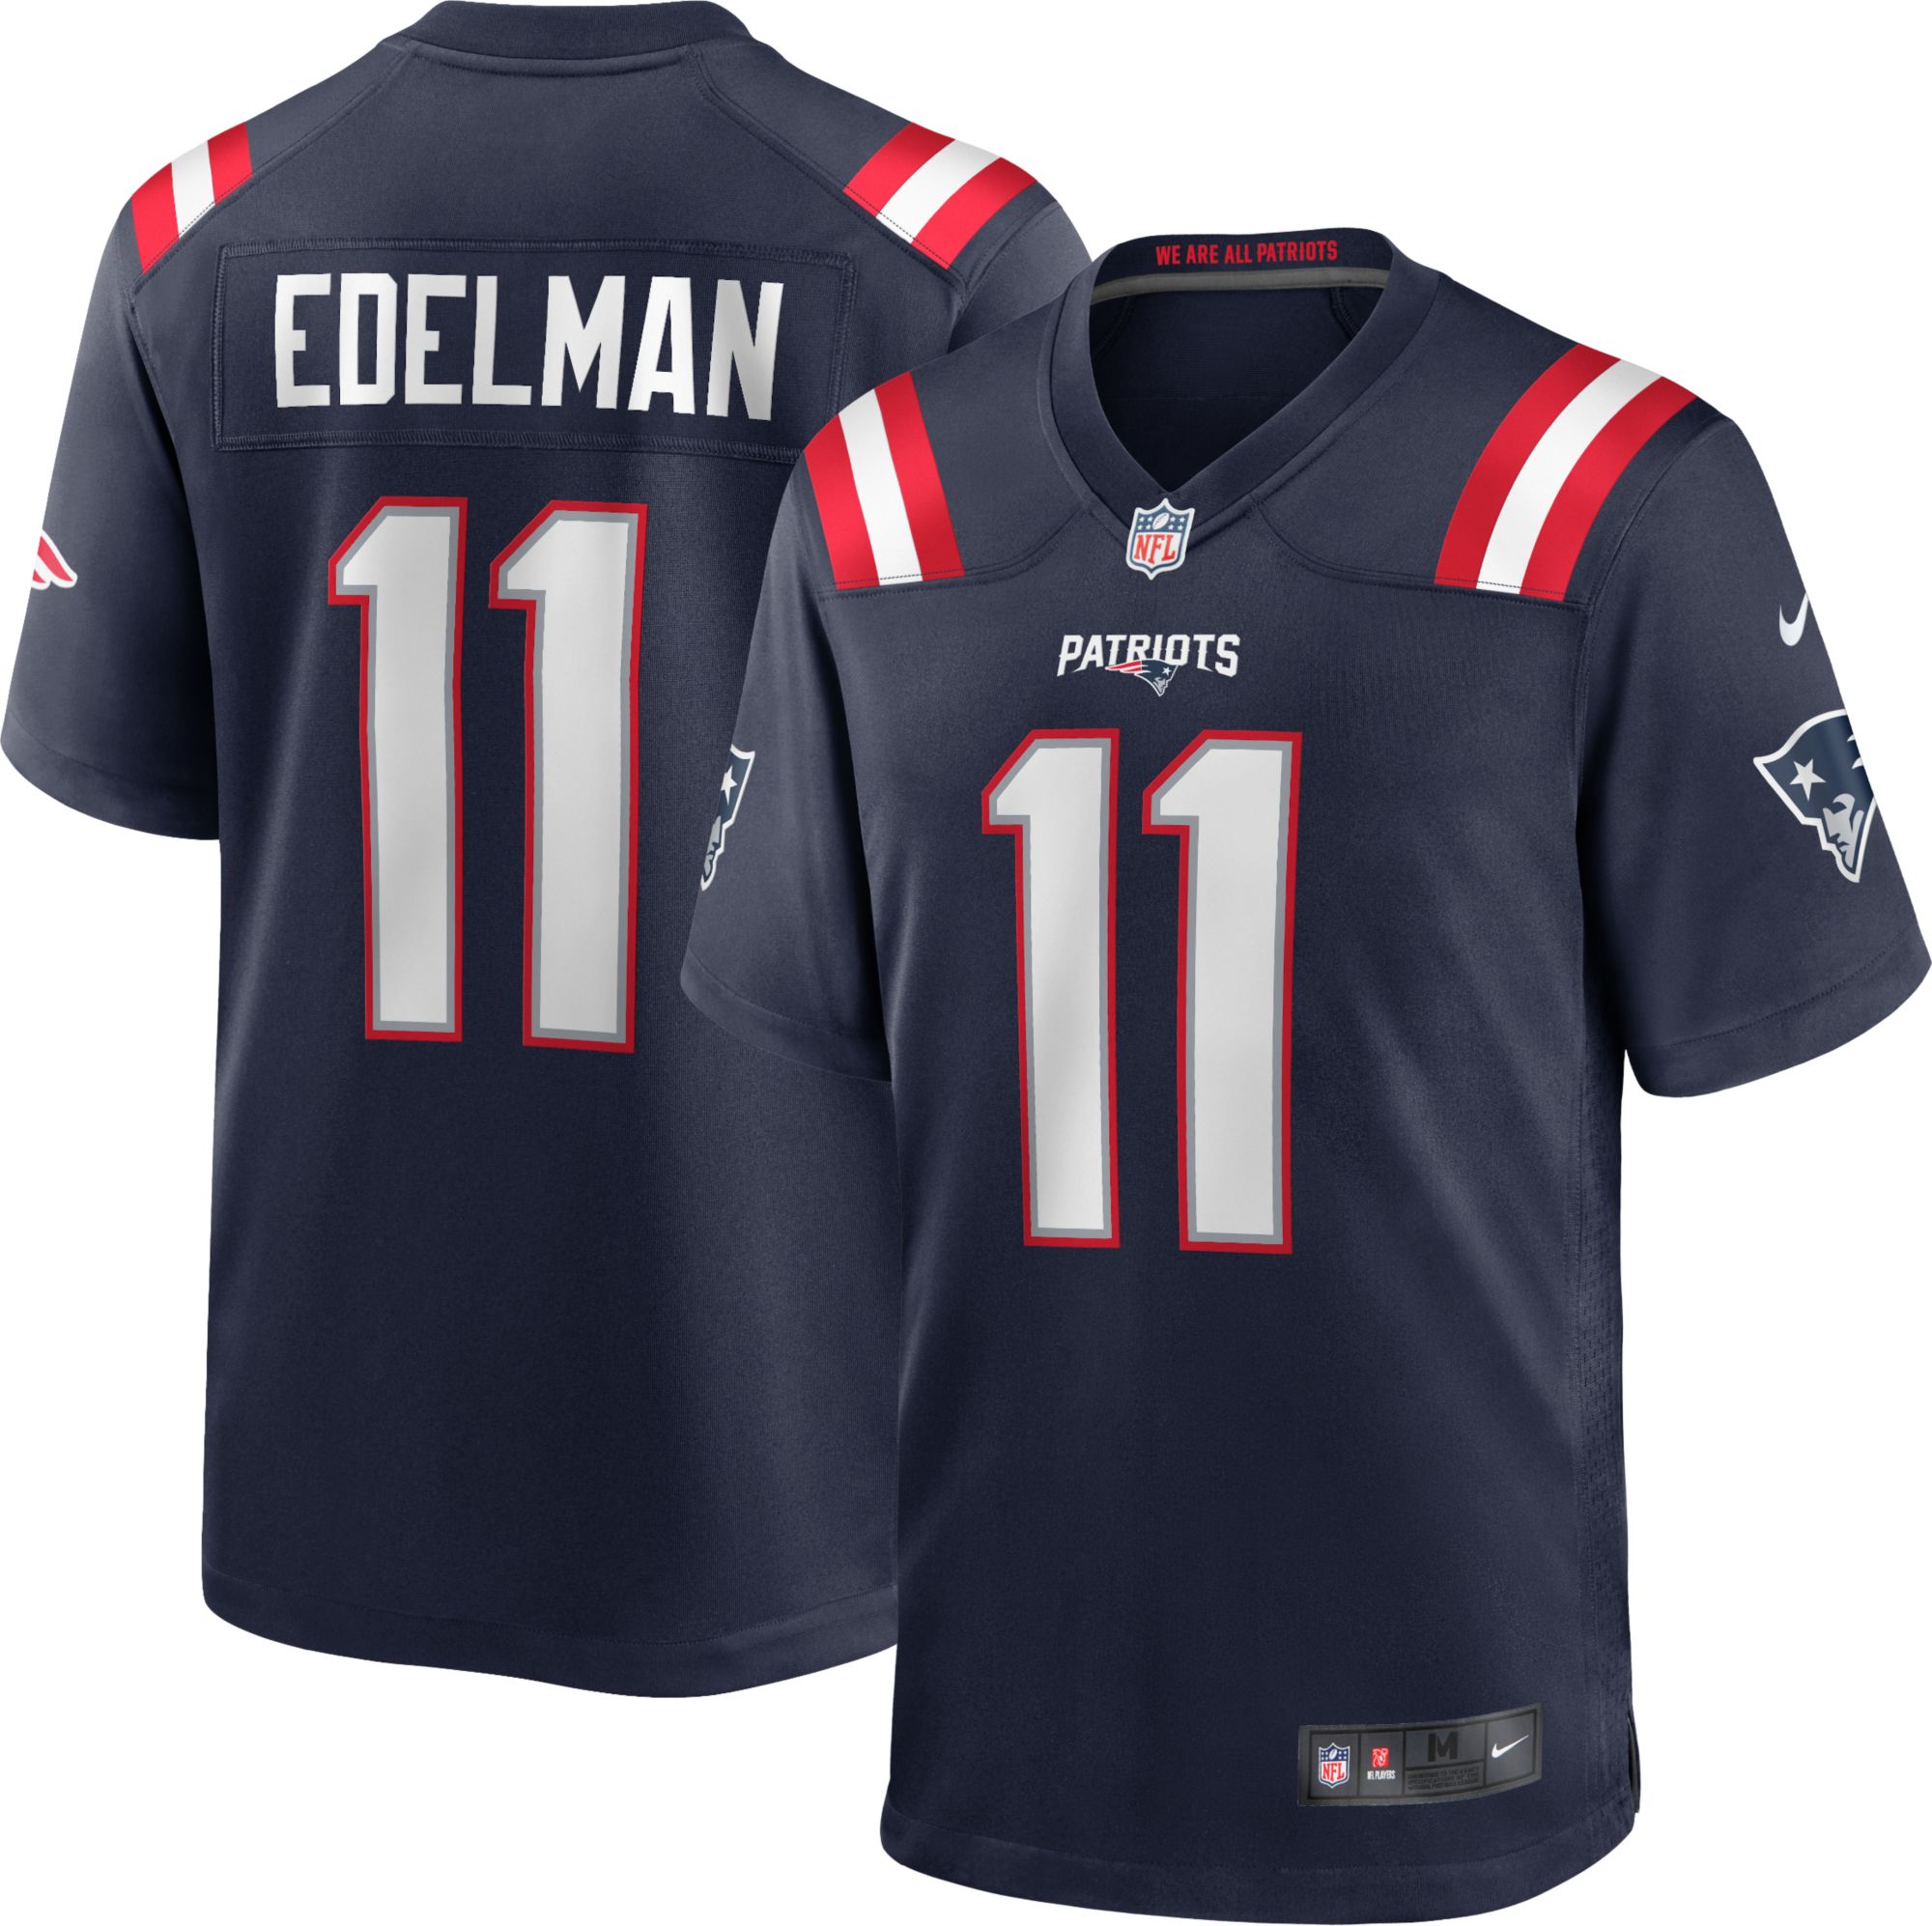 youth patriots jersey